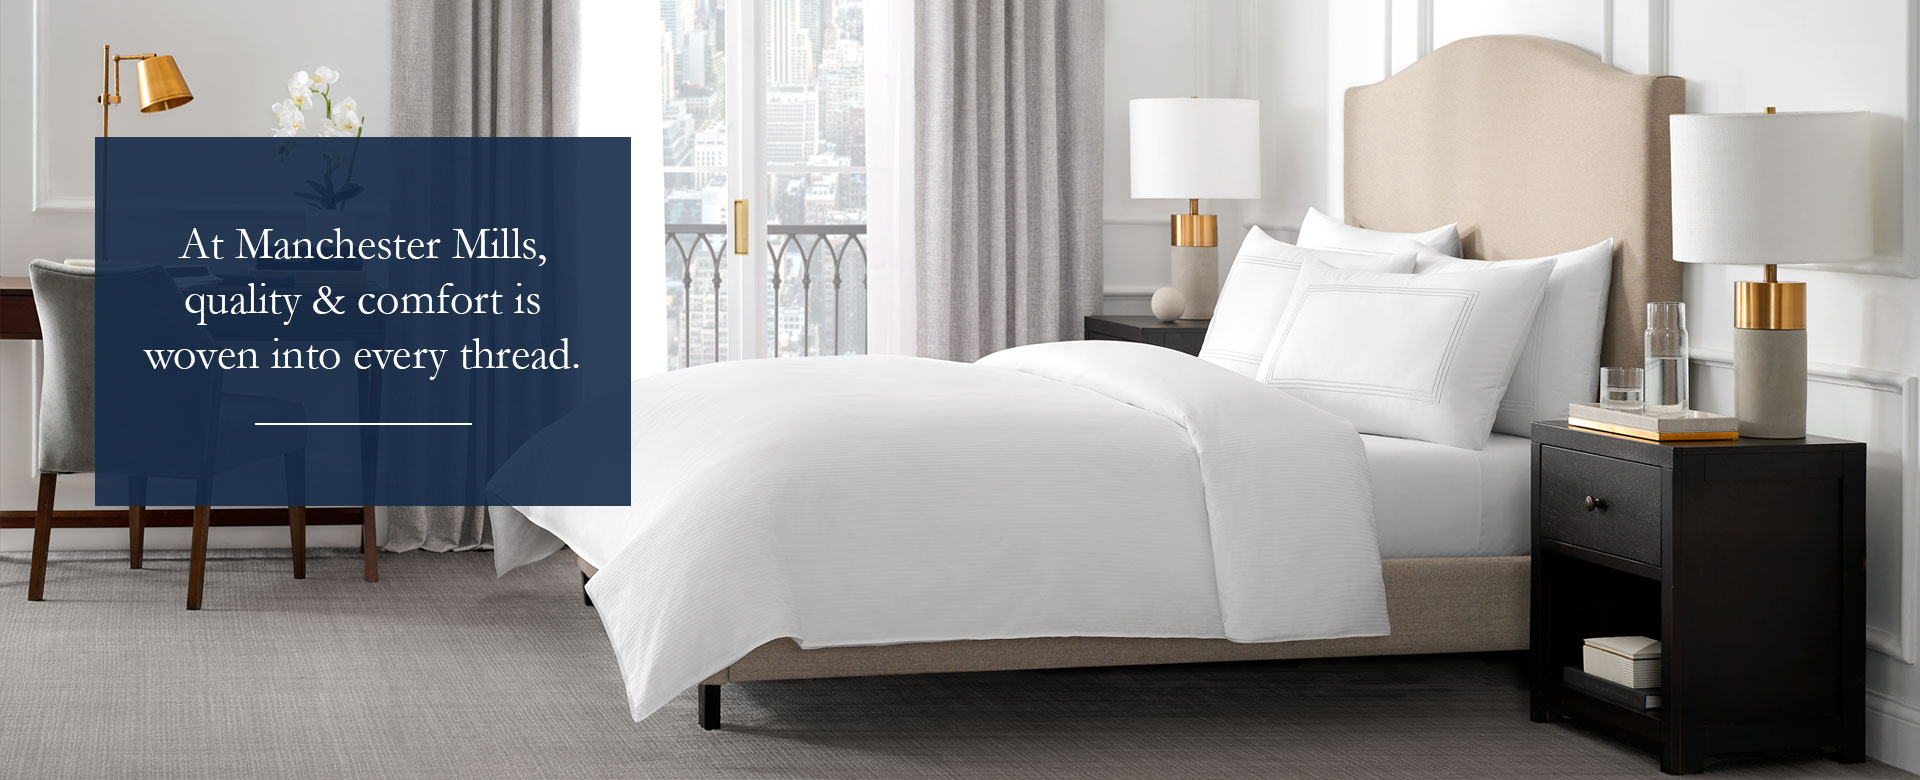 Manchester Mills - Quality Hotel Linens That You Can Depend On